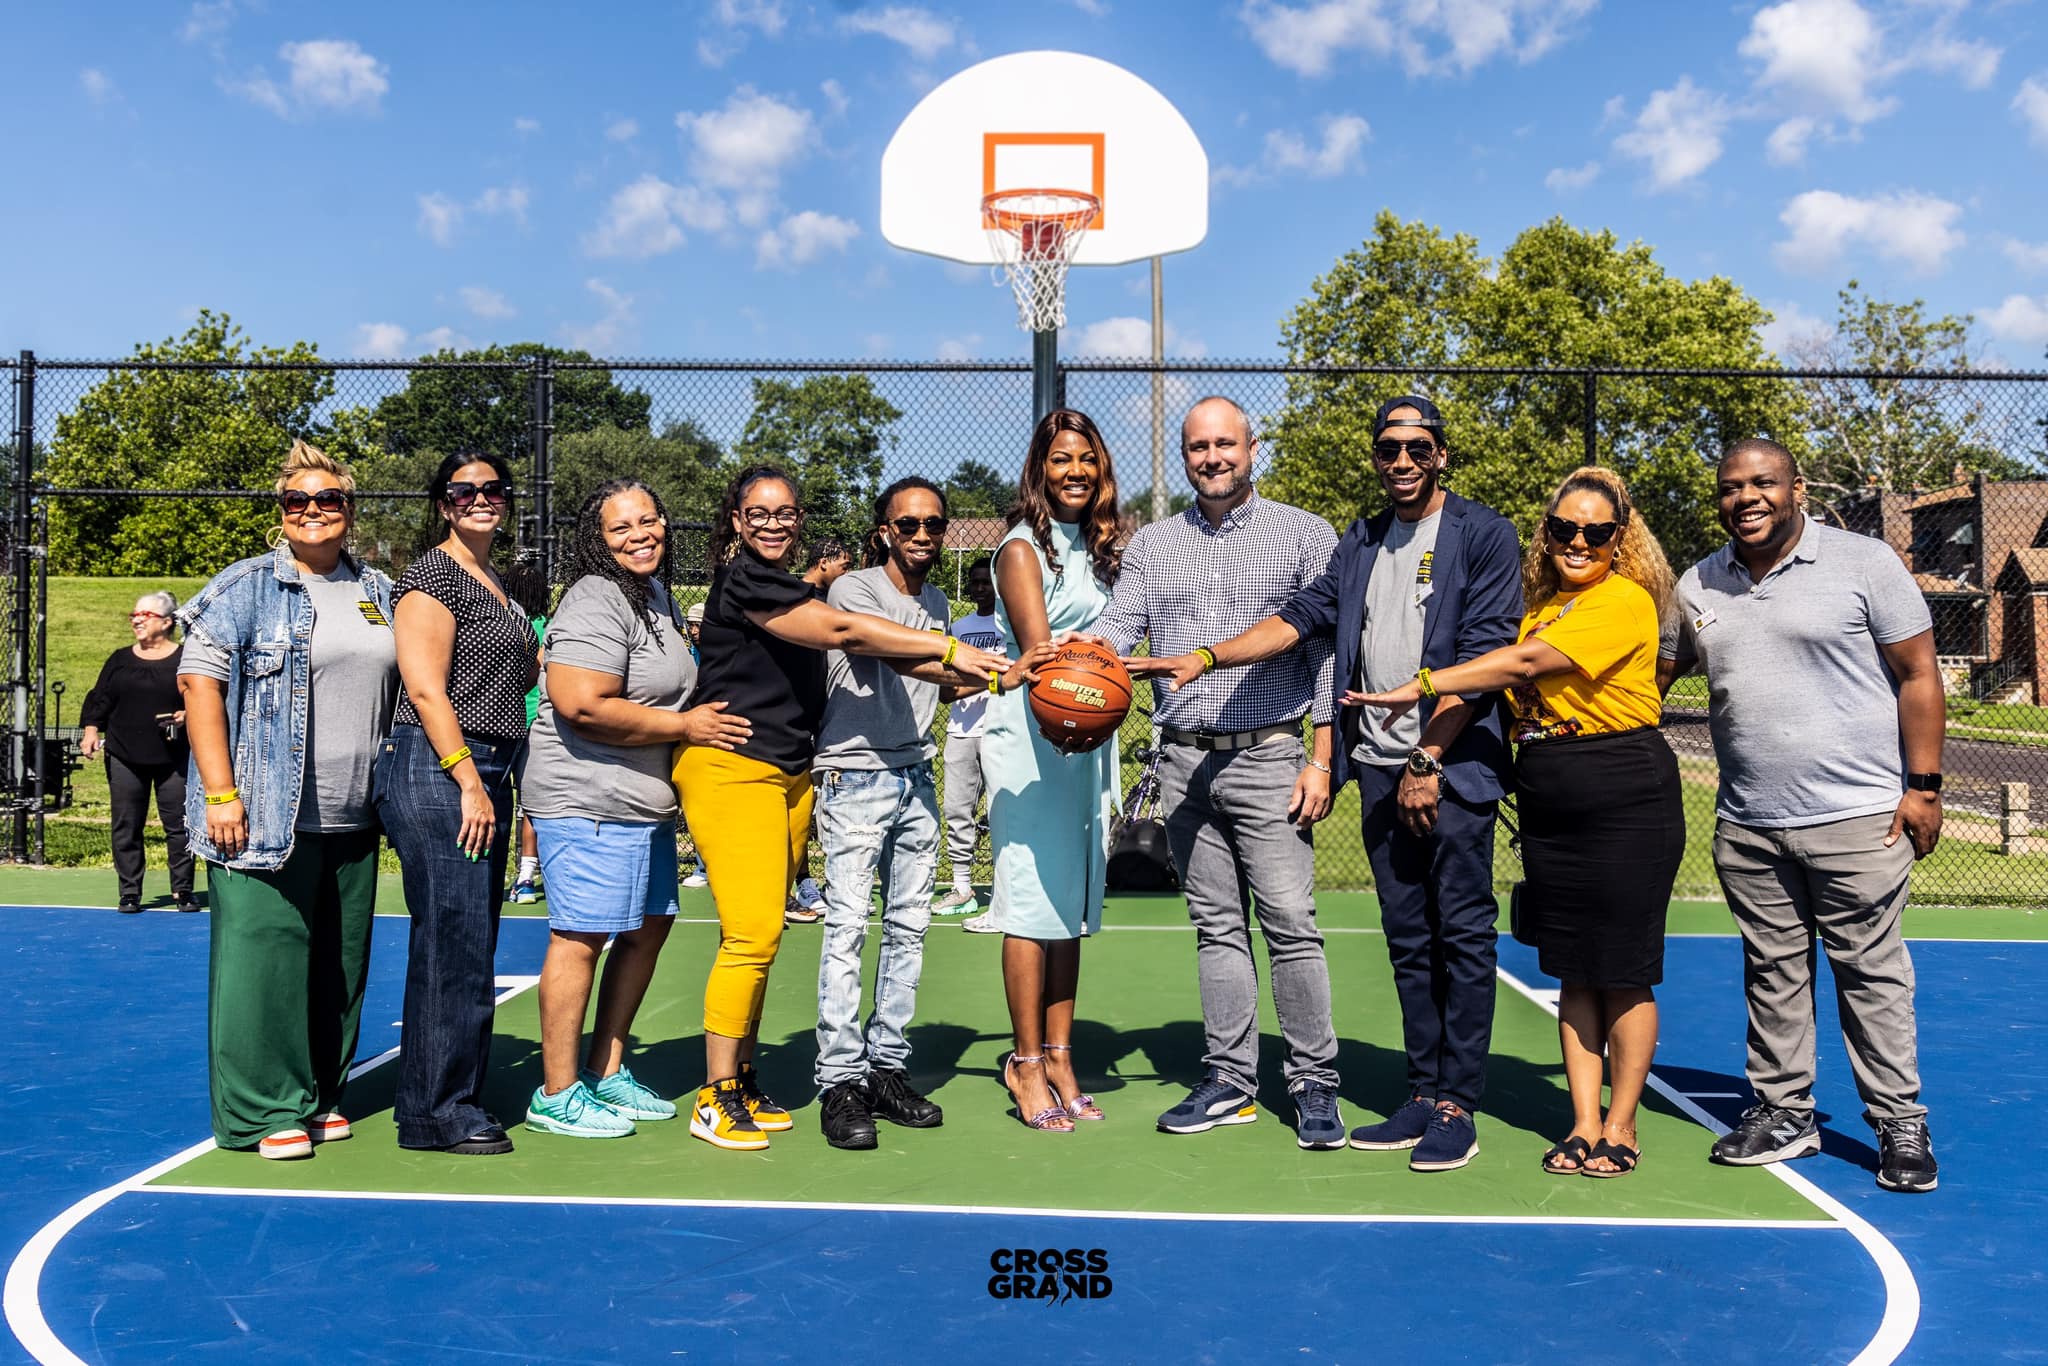 St. Louis Mayor Tishaura Jones and 3rd Ward Alderman Shane Cohn appear with Allies of Marquette Park and Dutchtown Main Streets board members at the ribbon cutting for the new basketball courts at Marquette Park. Photo by Chip Smith of Cross Grand.